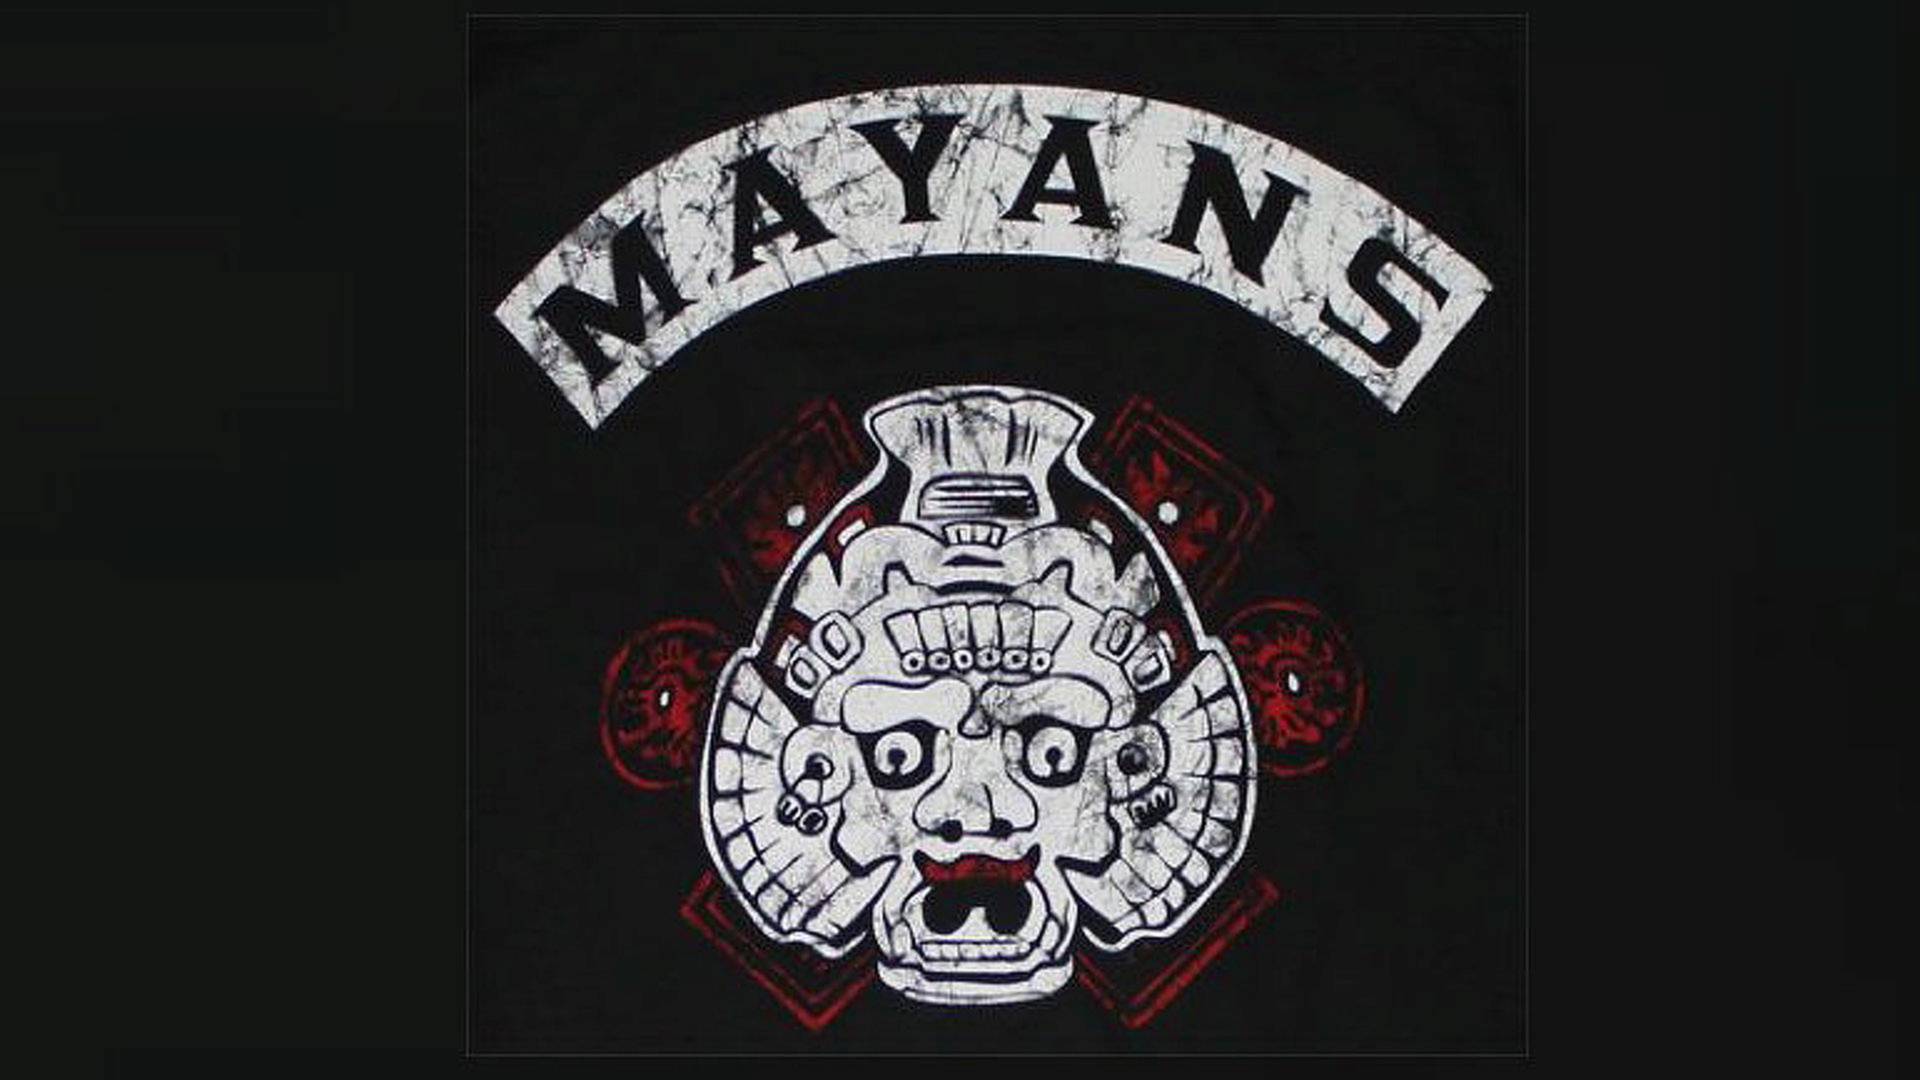 Mayans mc wallpaper is match and guidelines that suggested for you, for ide...